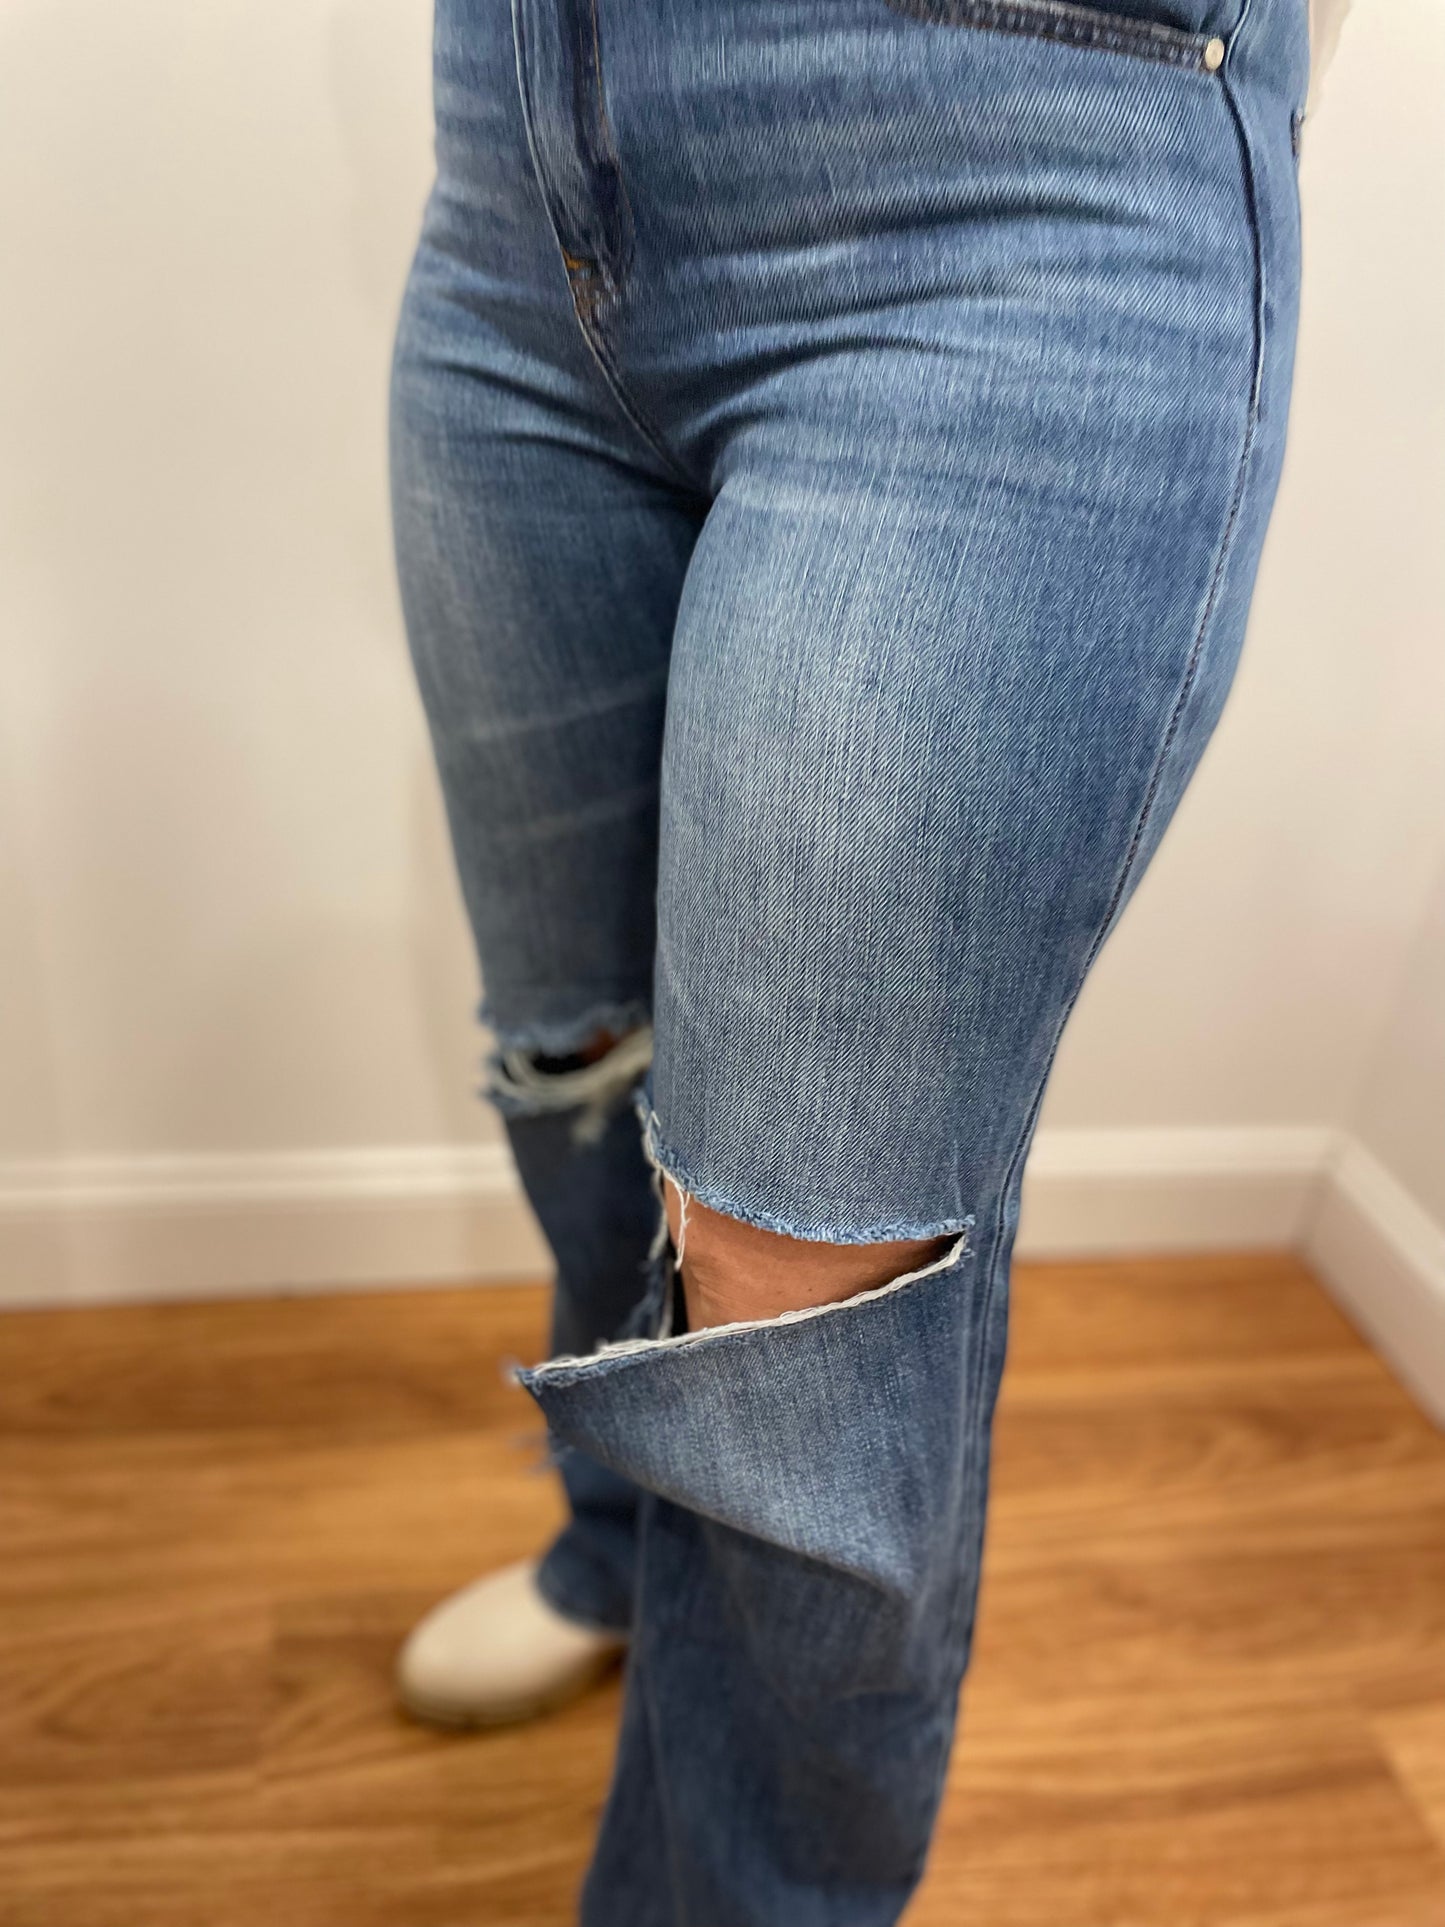 90's Comfy Jean - Size 11 & 13